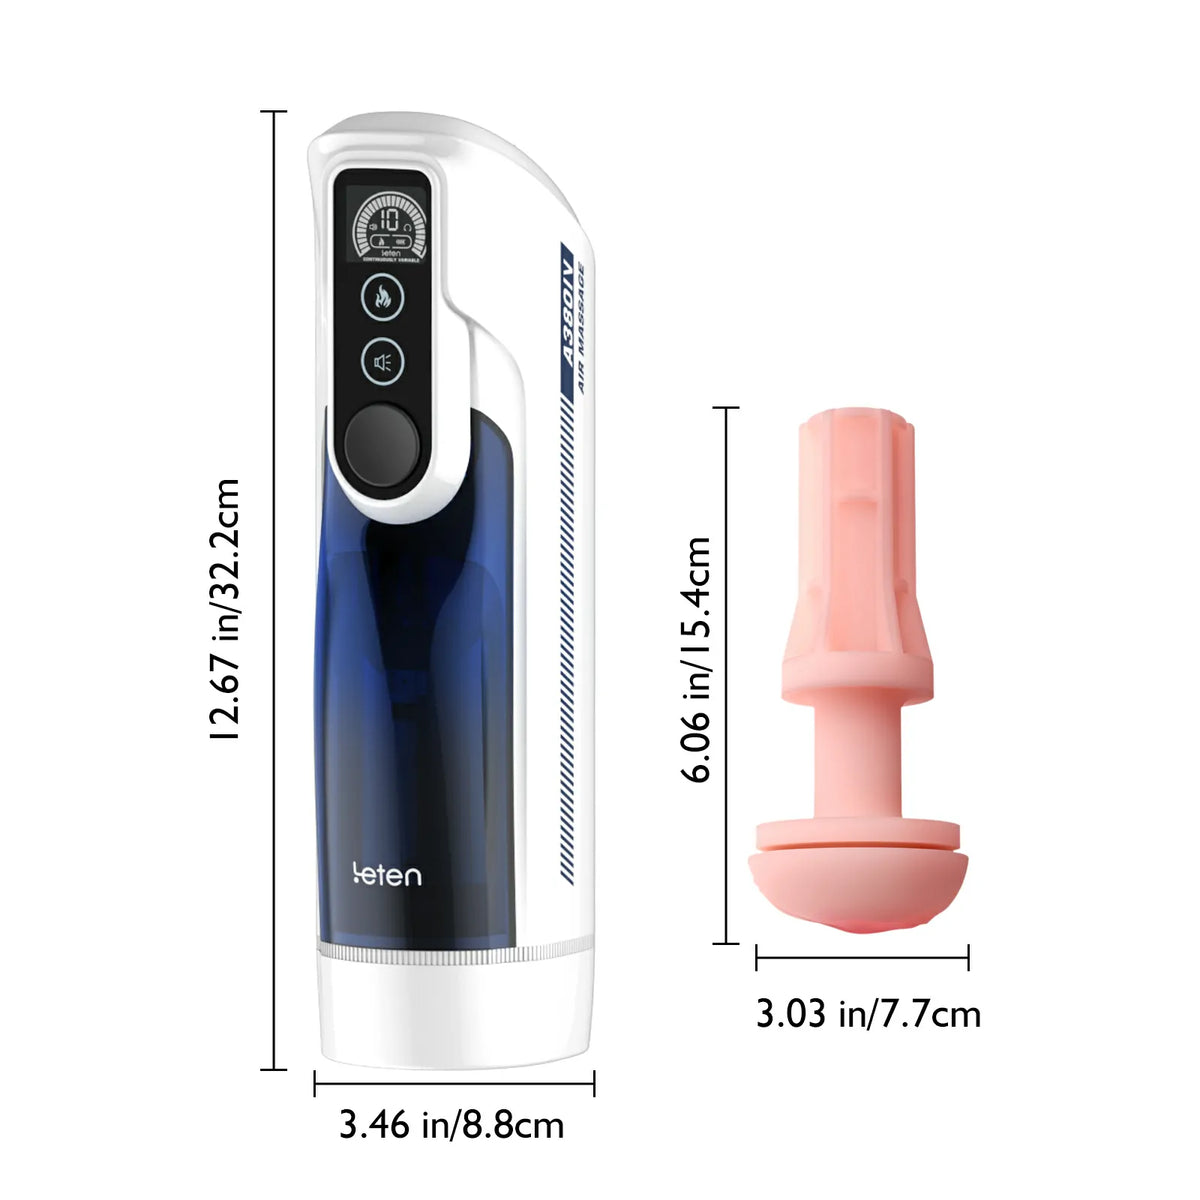 XT9 Plus Realistic Male Stroker 10 Thrusting & Rocking Heating Voice